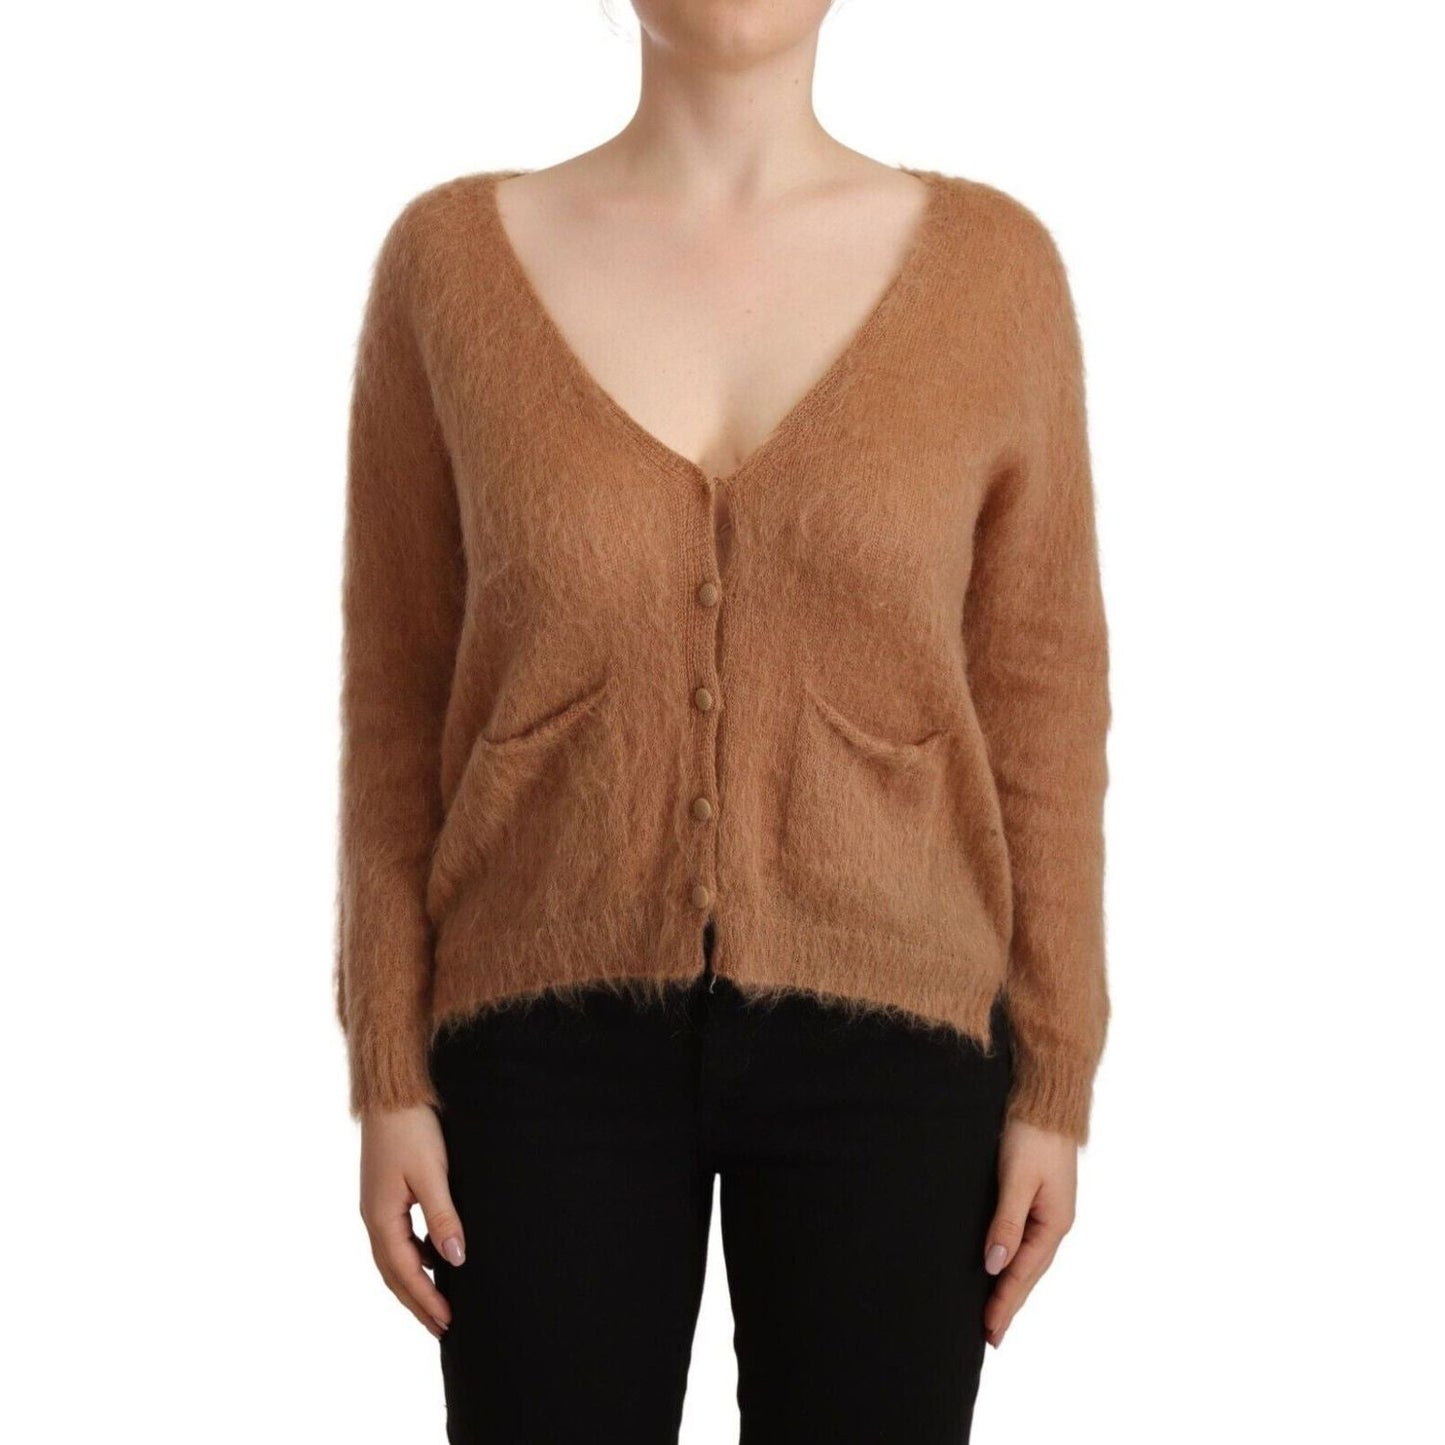 PINK MEMORIES Chic Brown Knit Cardigan with Front Button Closure brown-cardigan-v-neck-long-sleeve-sweater